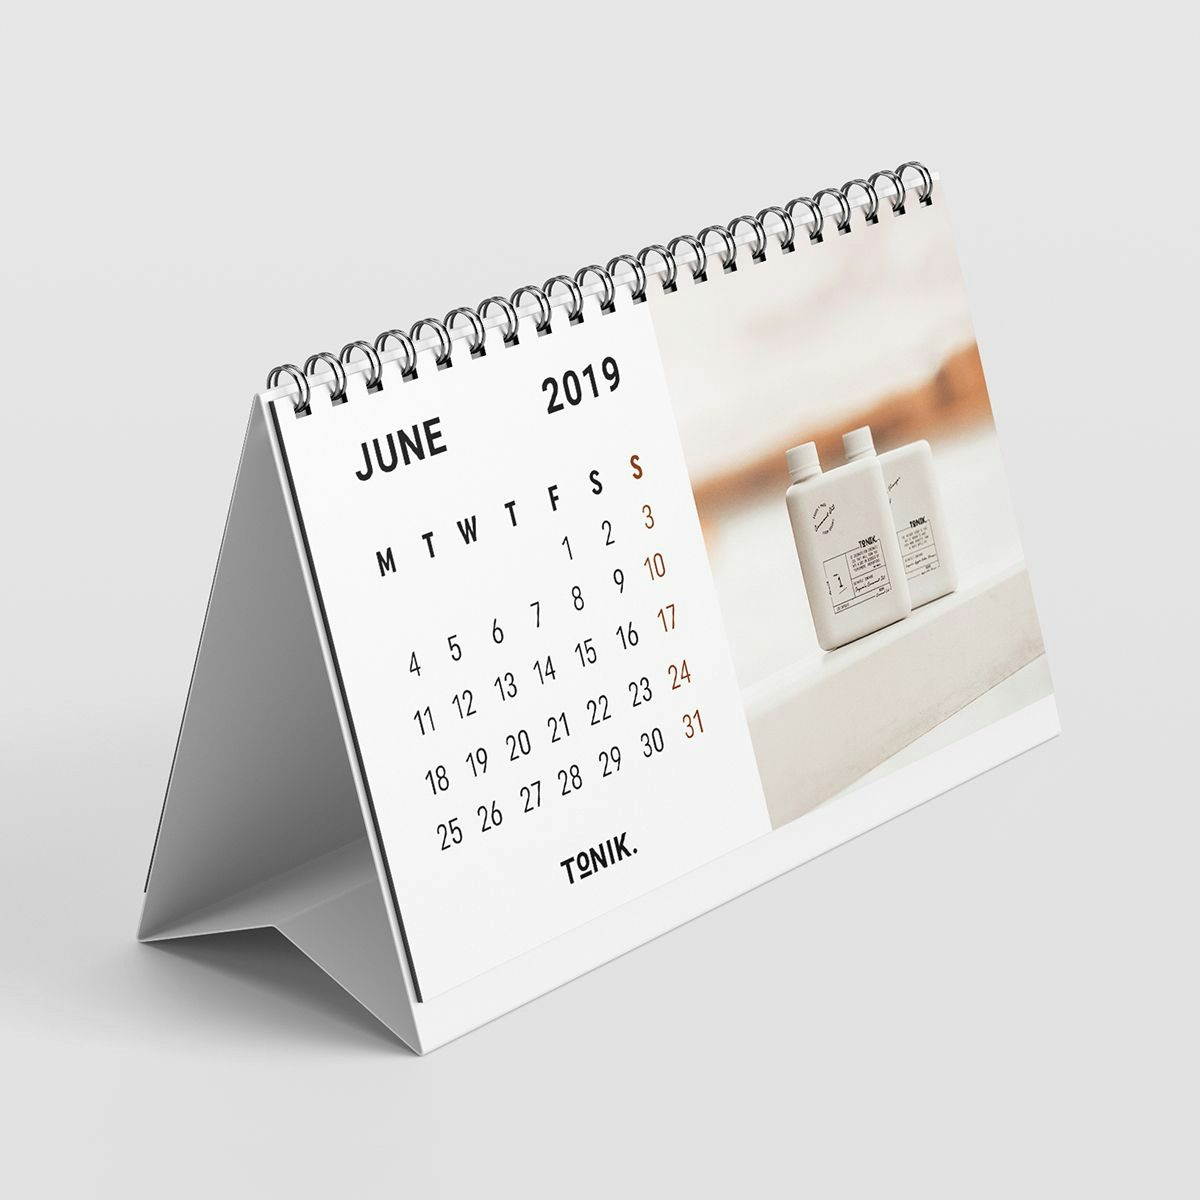 Paper Calendar Recycling in Singapore